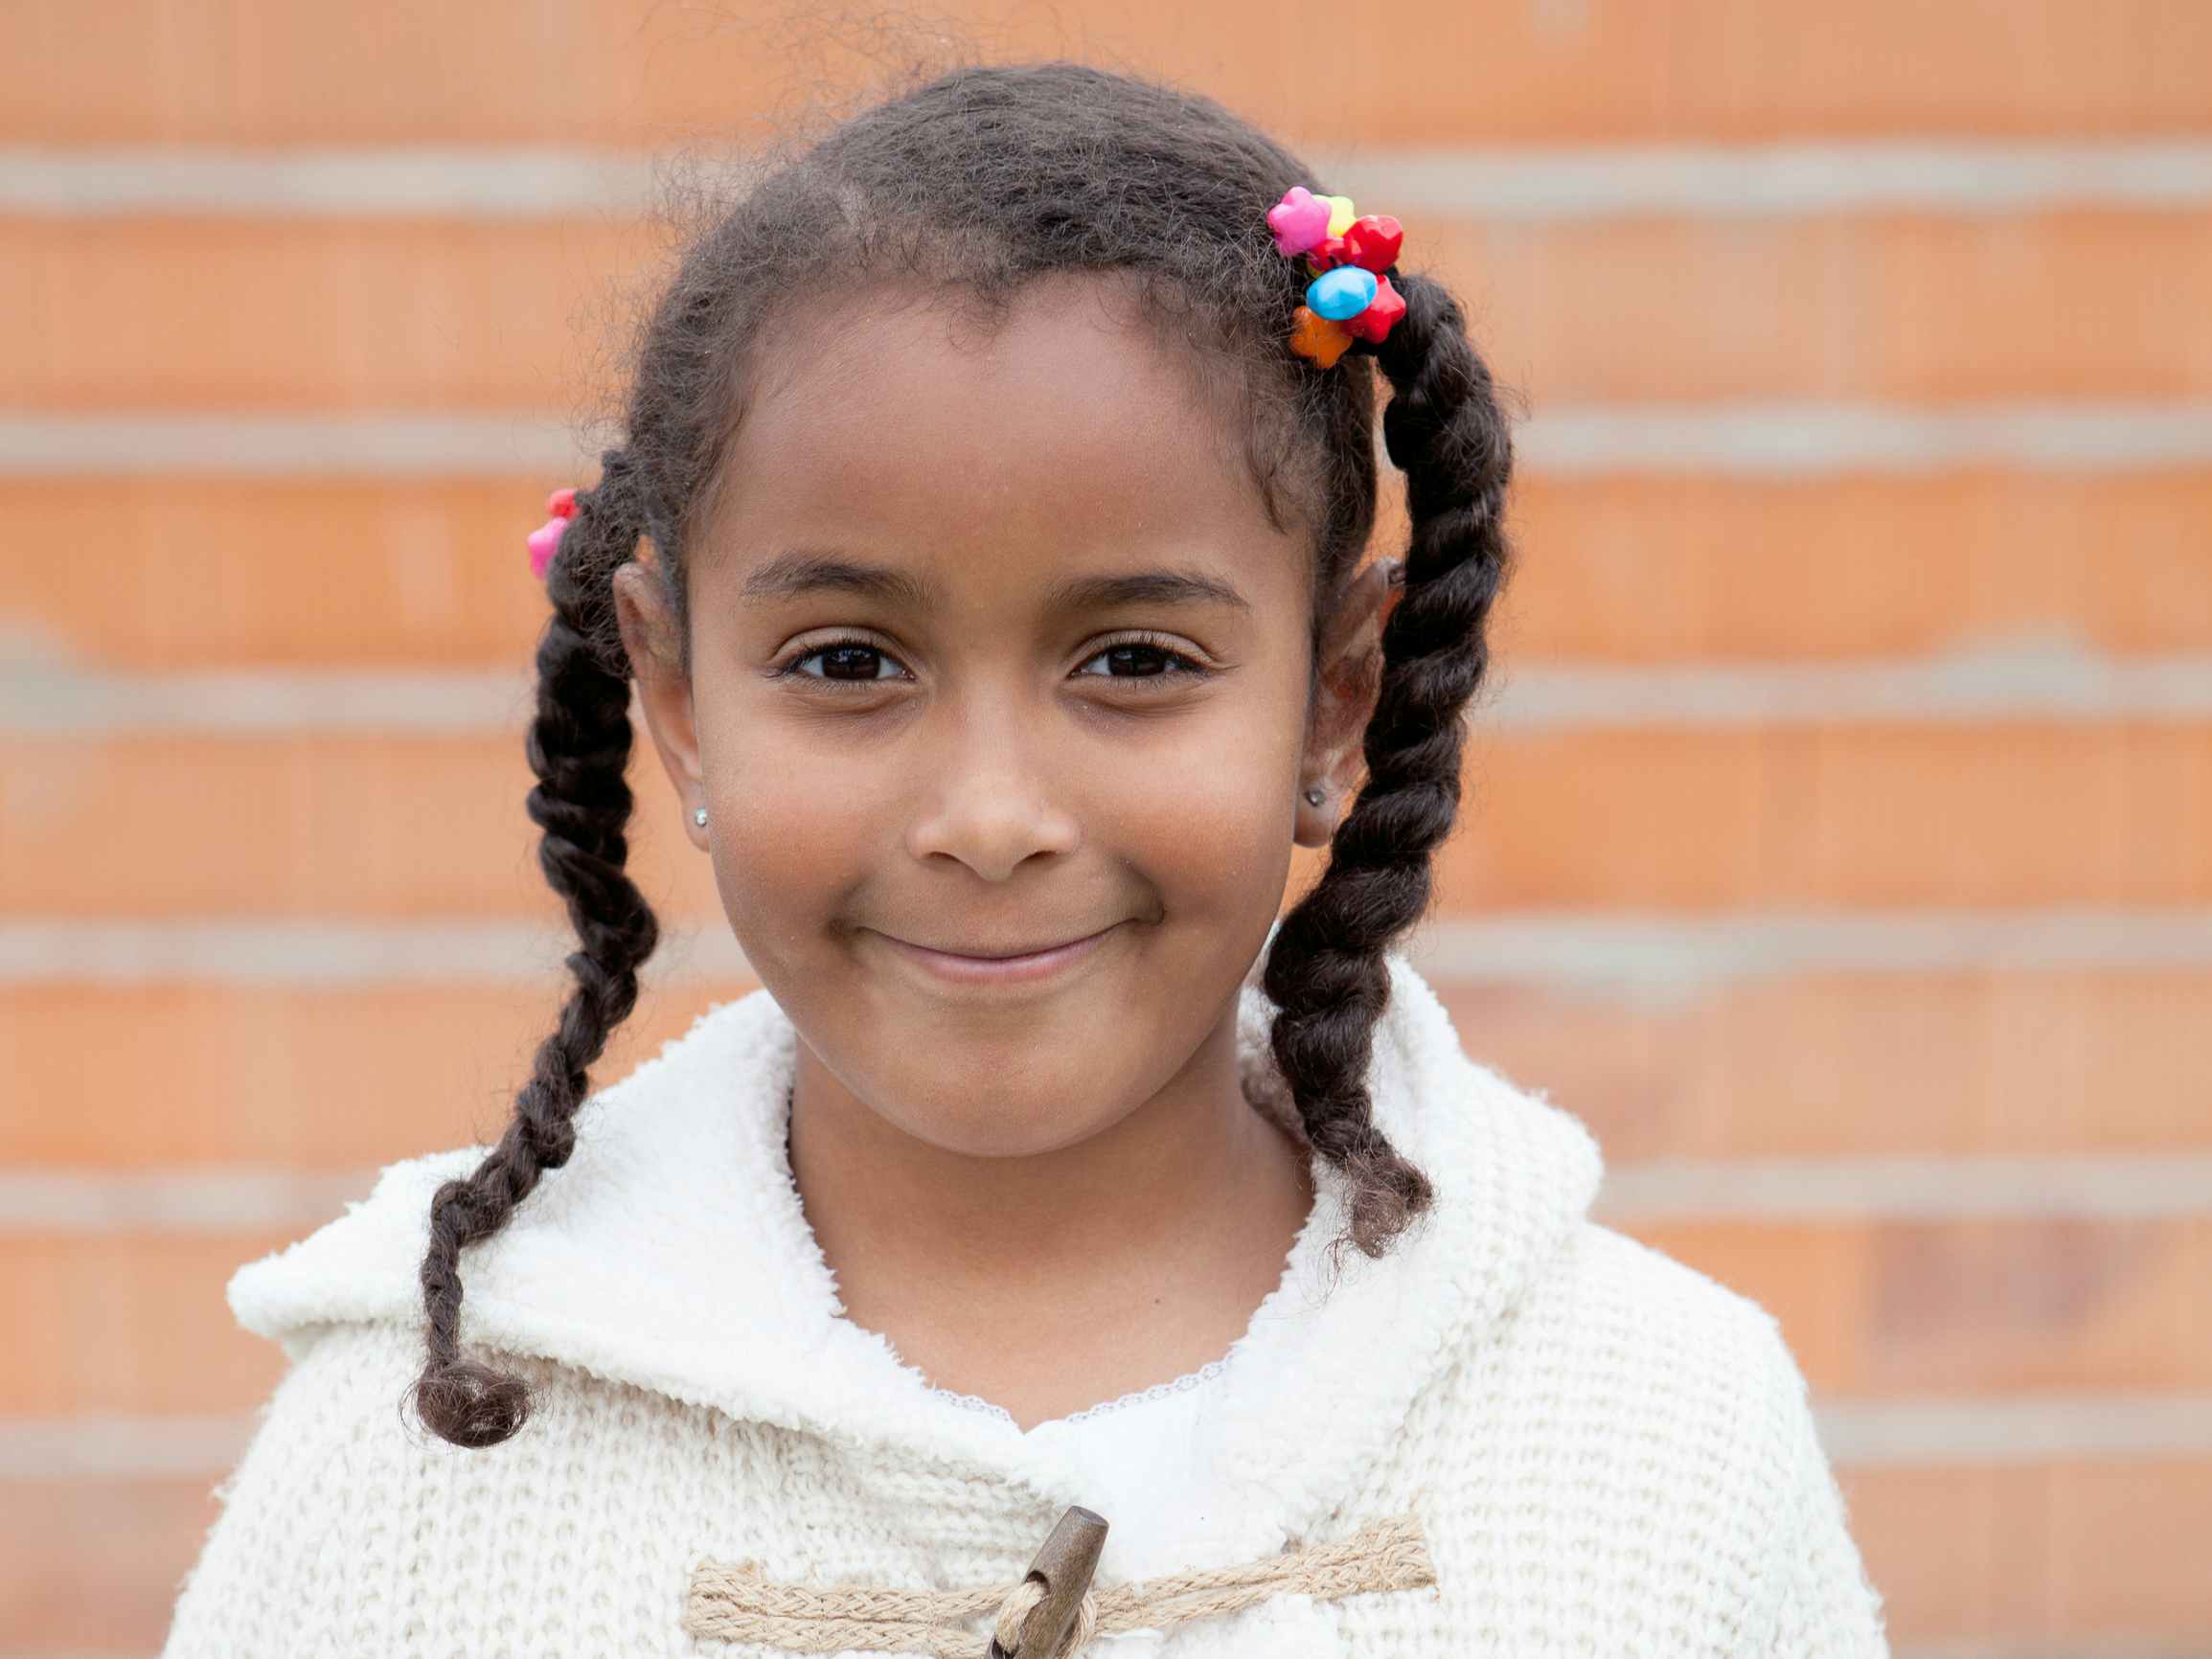 A young girl with asymmetrical ponytails